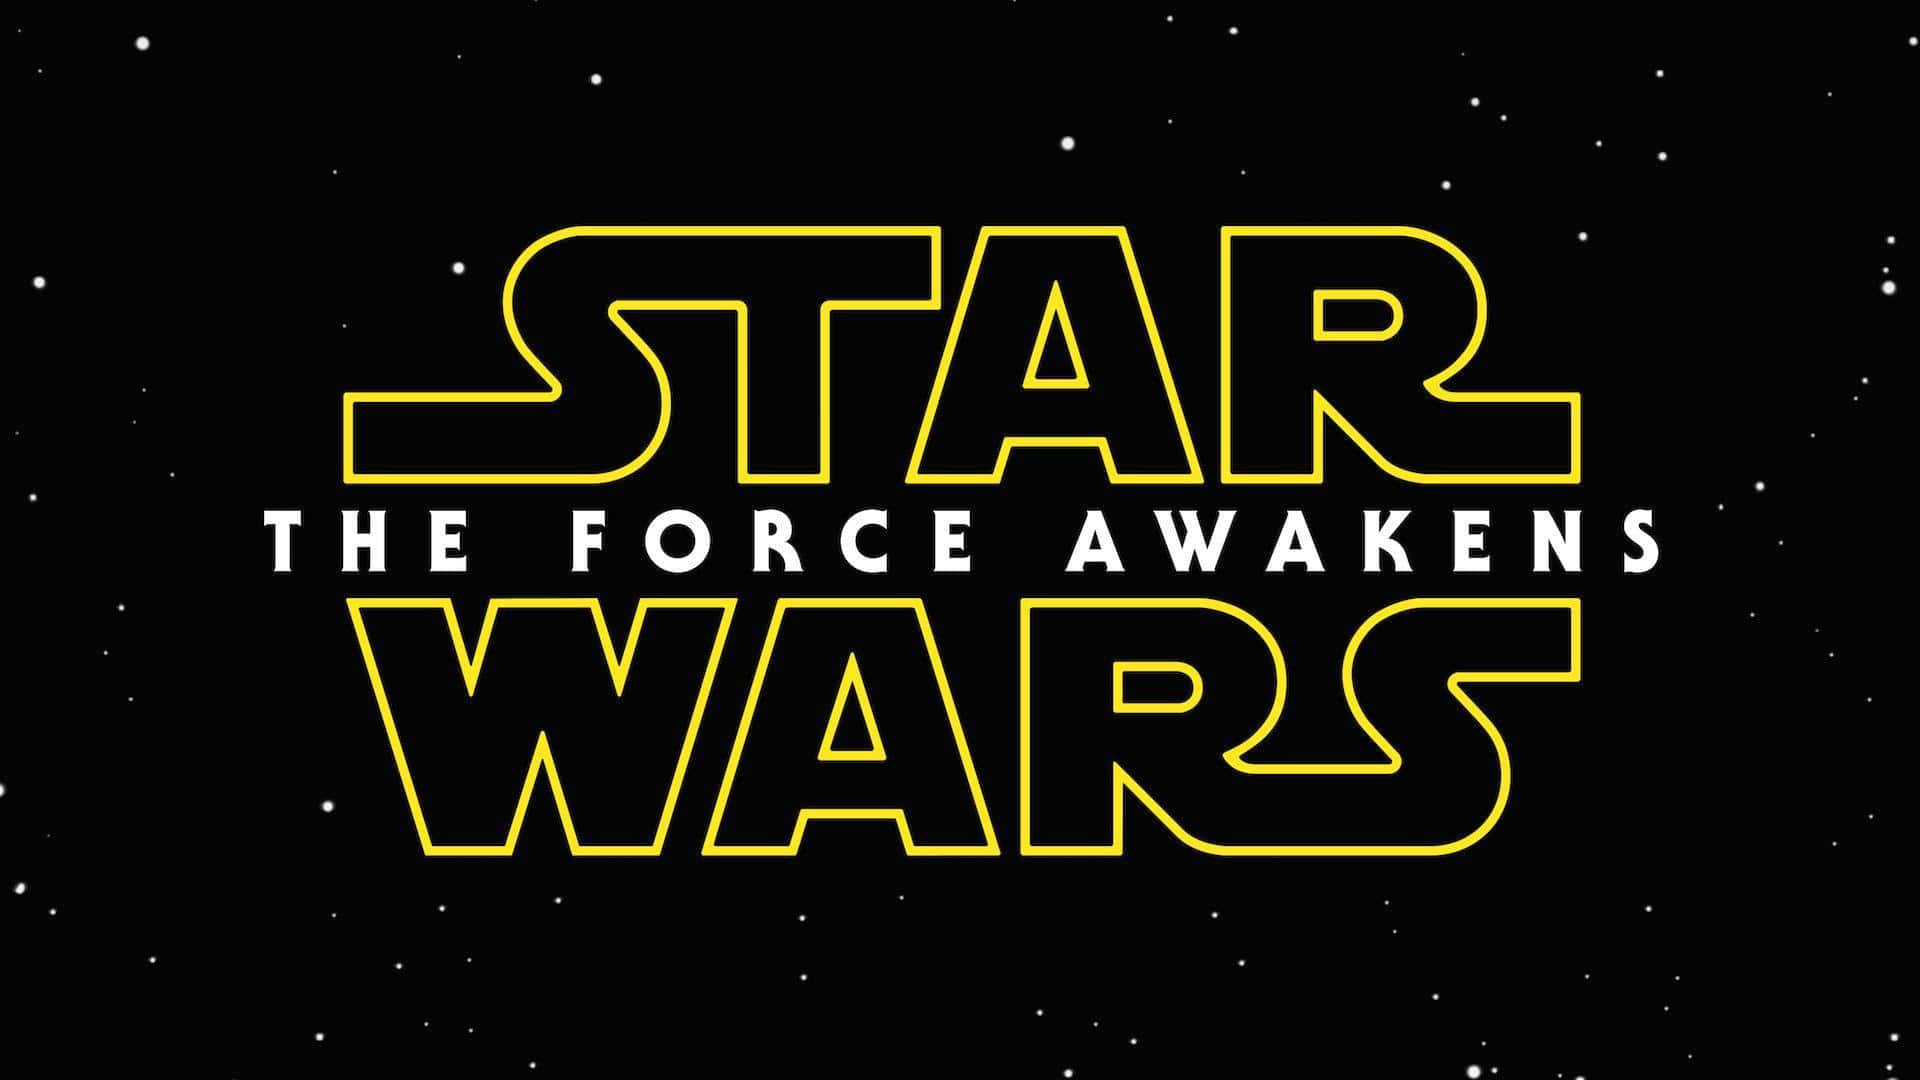 Challenge yourself to explore the unknown with Star Wars: The Force Awakens Wallpaper